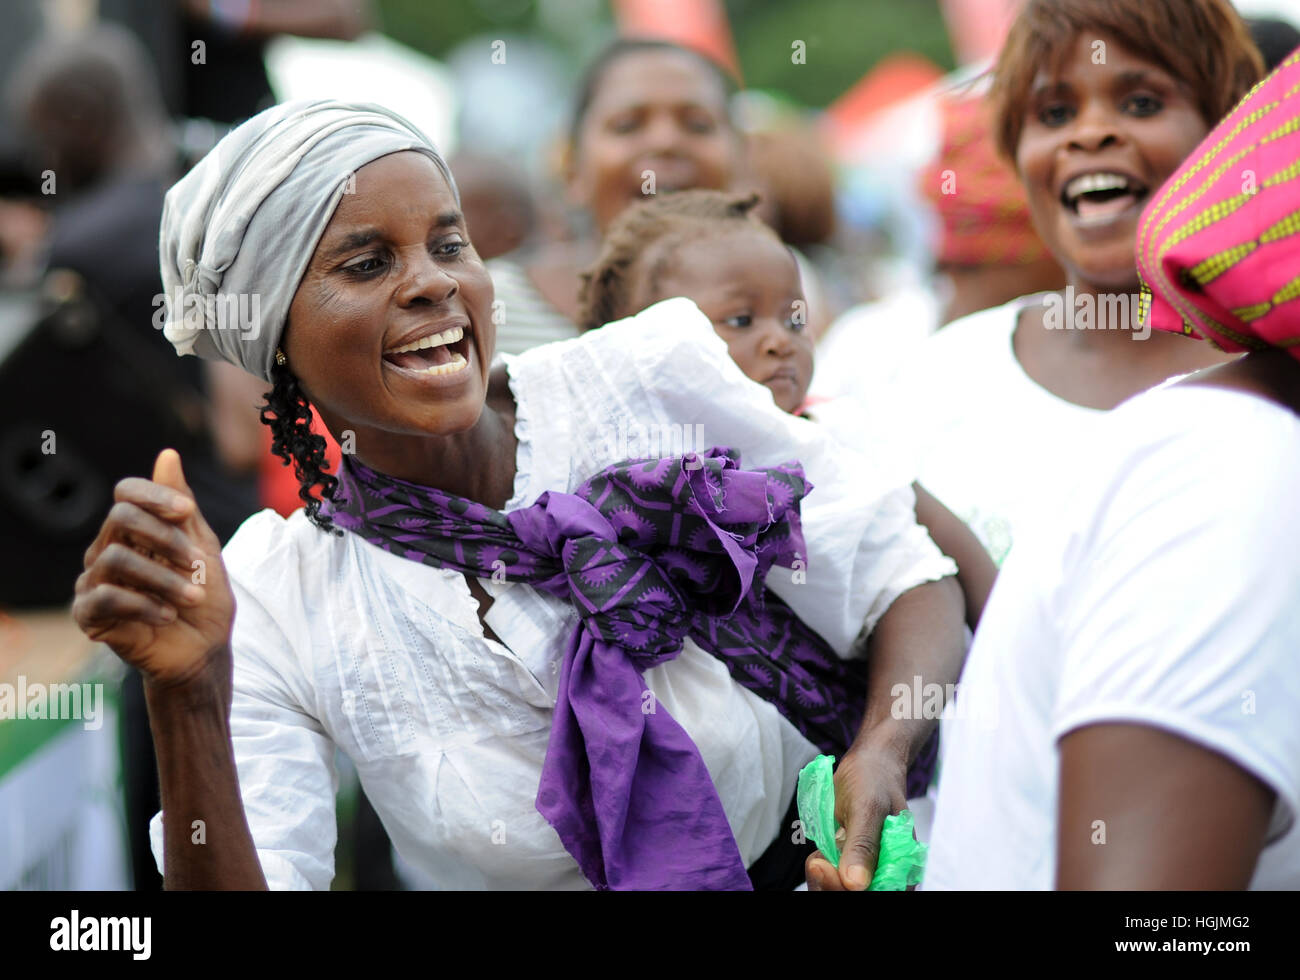 Lusaka, Zambia. 08th Mar, 2016. A women with an infant on her back dances at a celebration of International Women's Day in Lusaka, Zambia, 08 March 2016. Photo: Britta Pedersen/dpa-Zentralbild/ZB/dpa/Alamy Live News Stock Photo